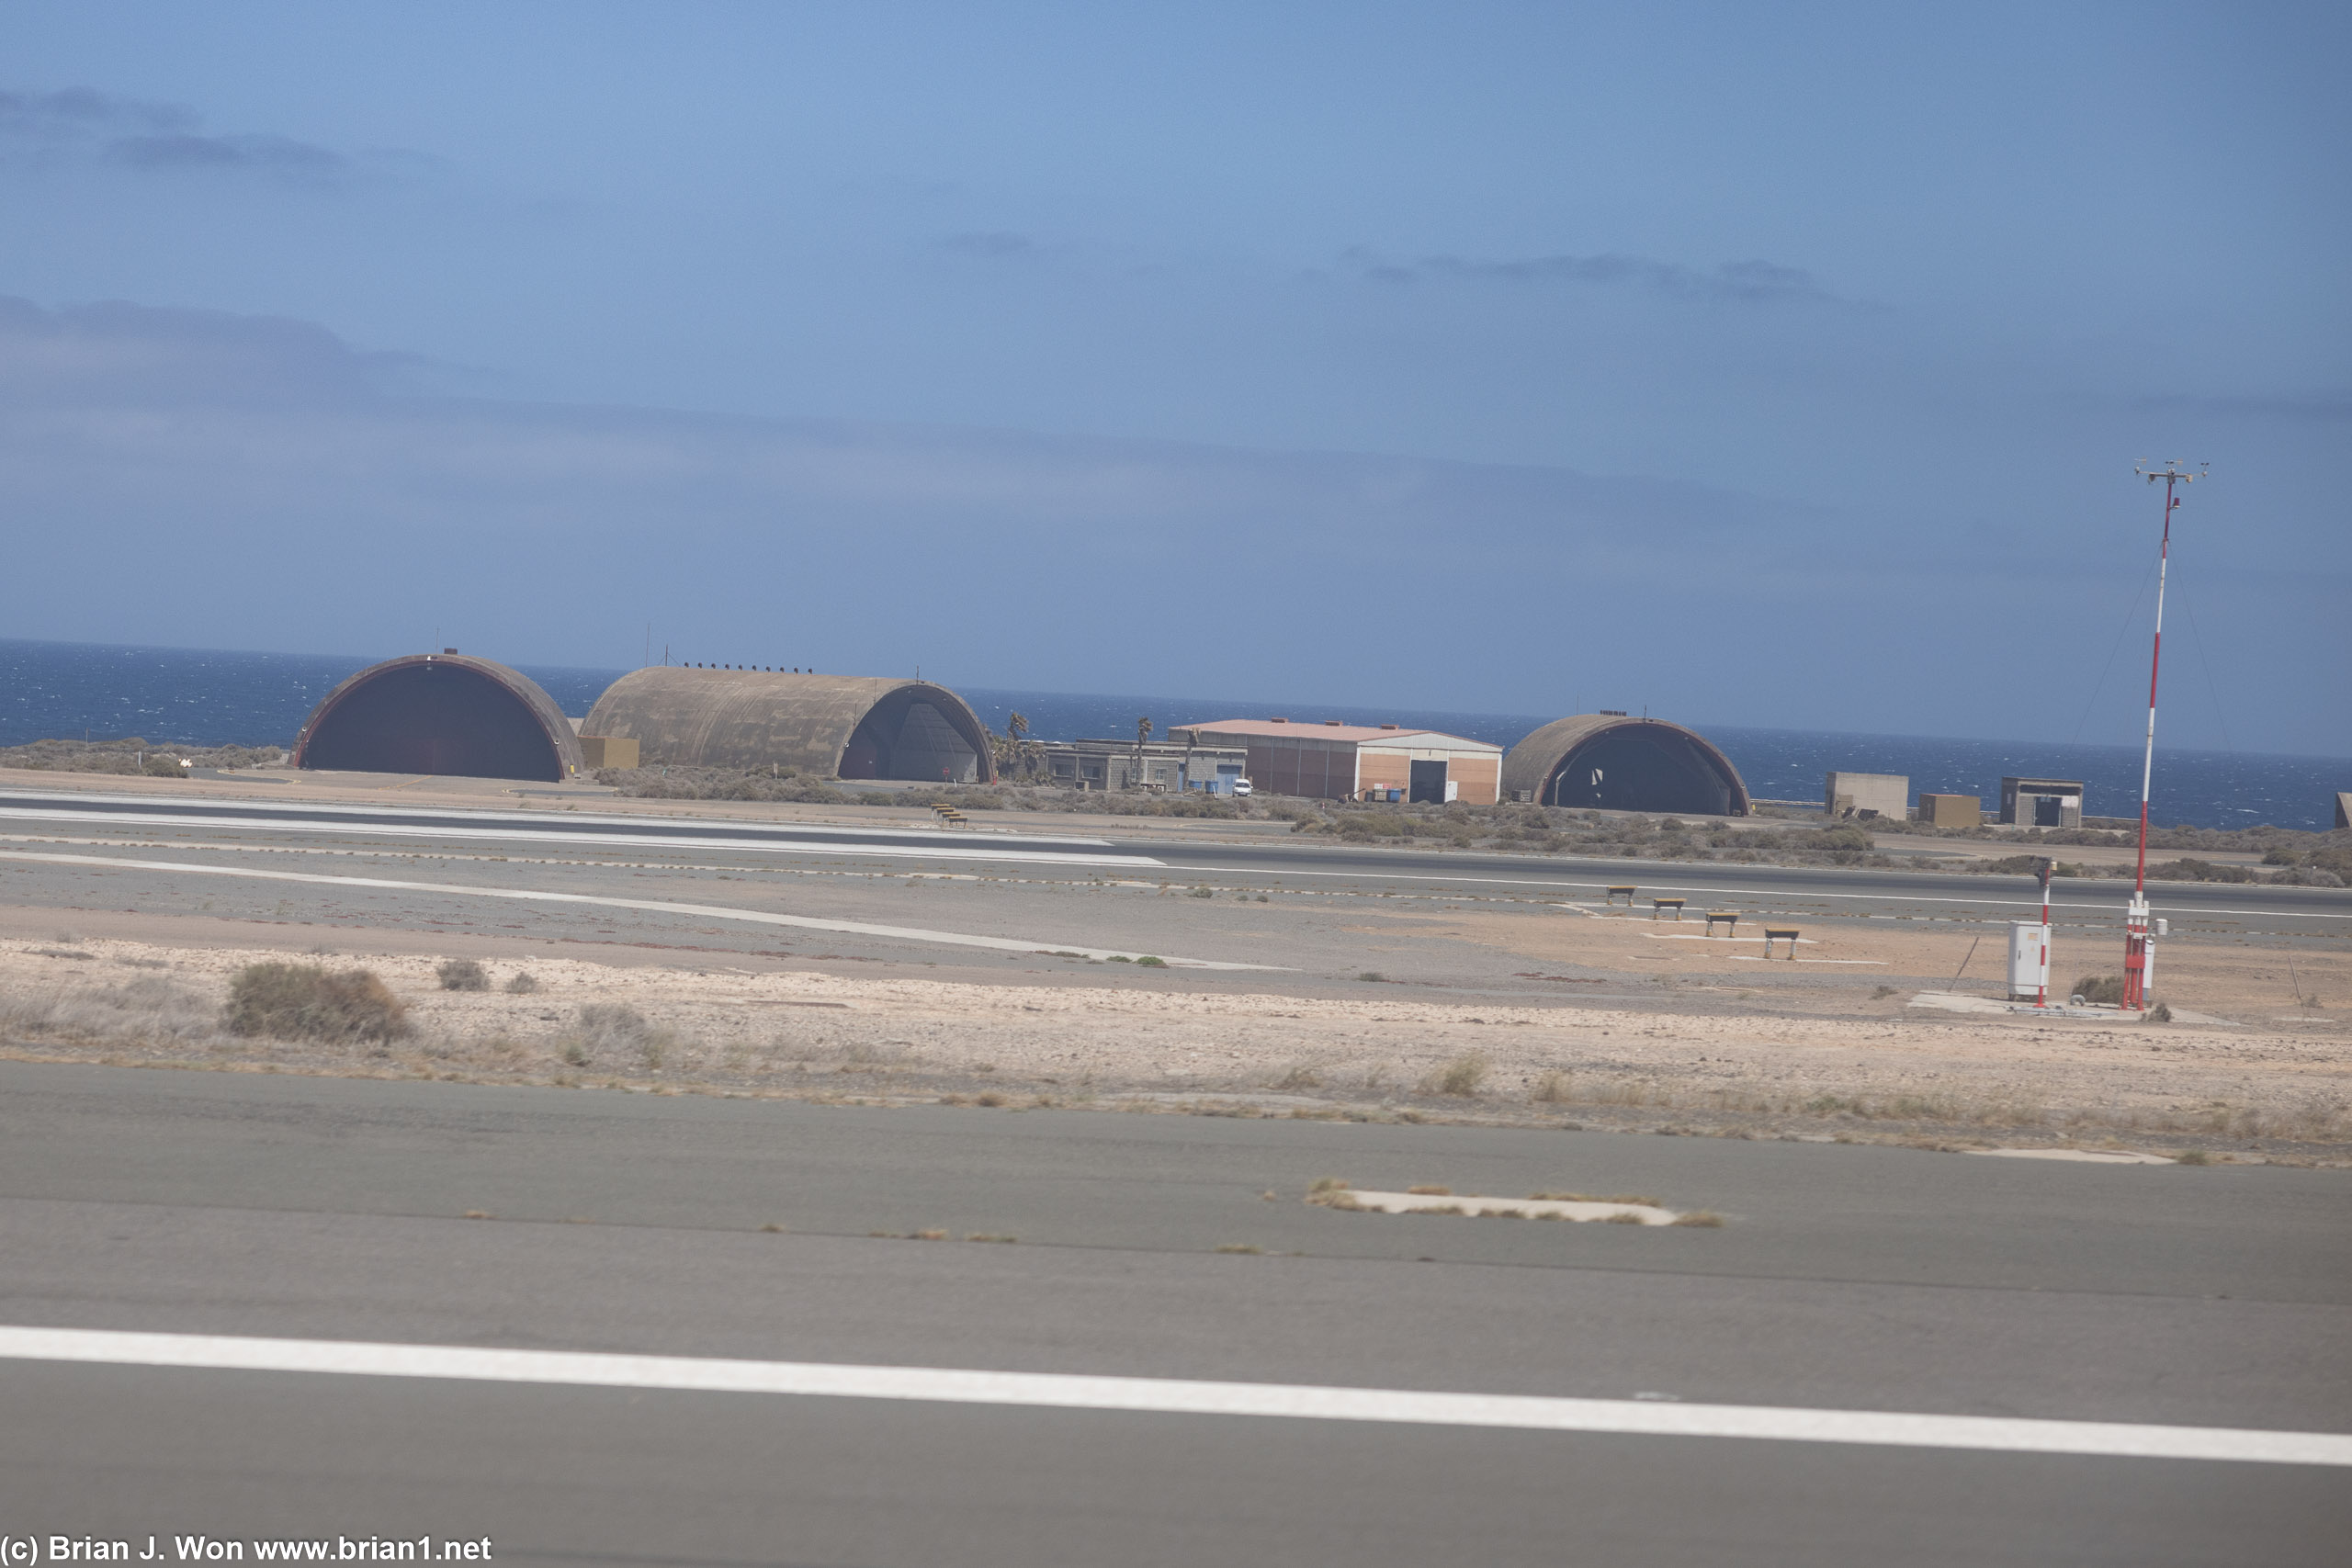 Spanish Air Force hardened shelters at Gran Canaria airport, with F/A-18A Hornets safely underneath.